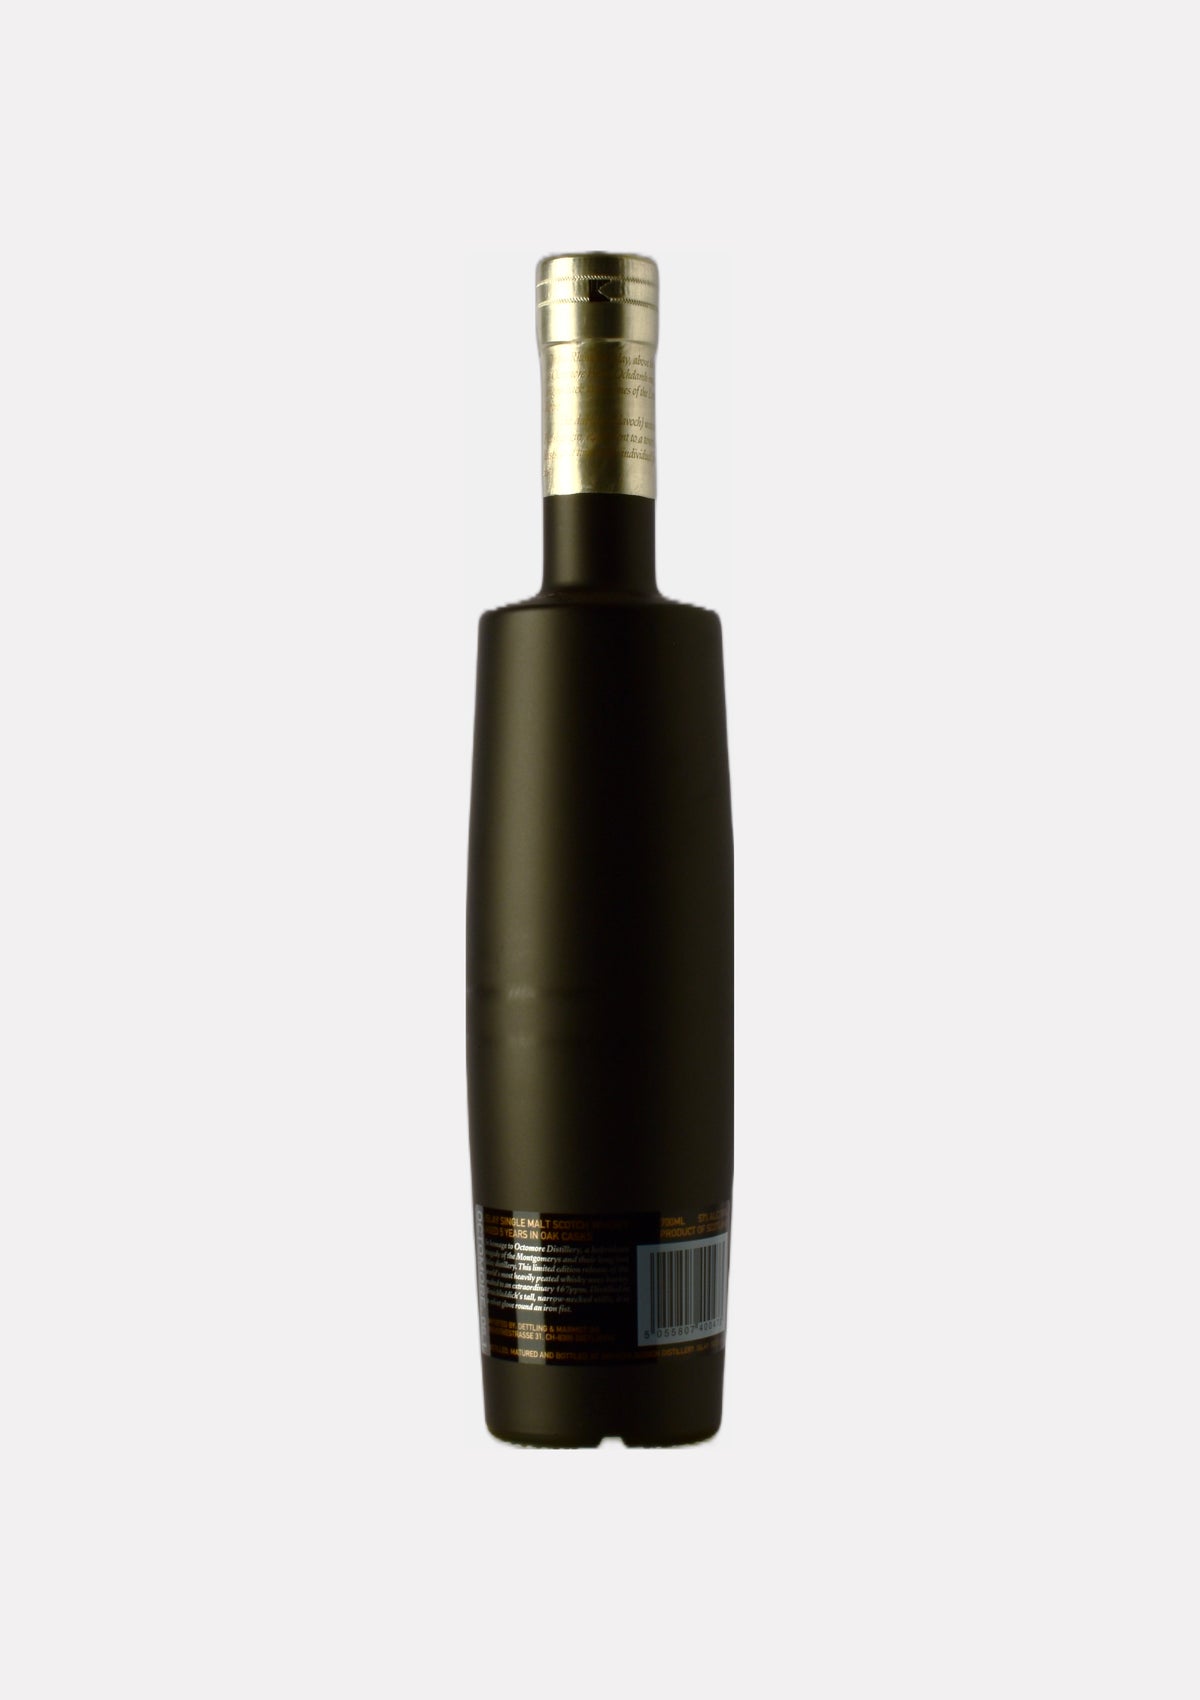 Octomore 06.1 167 ppm